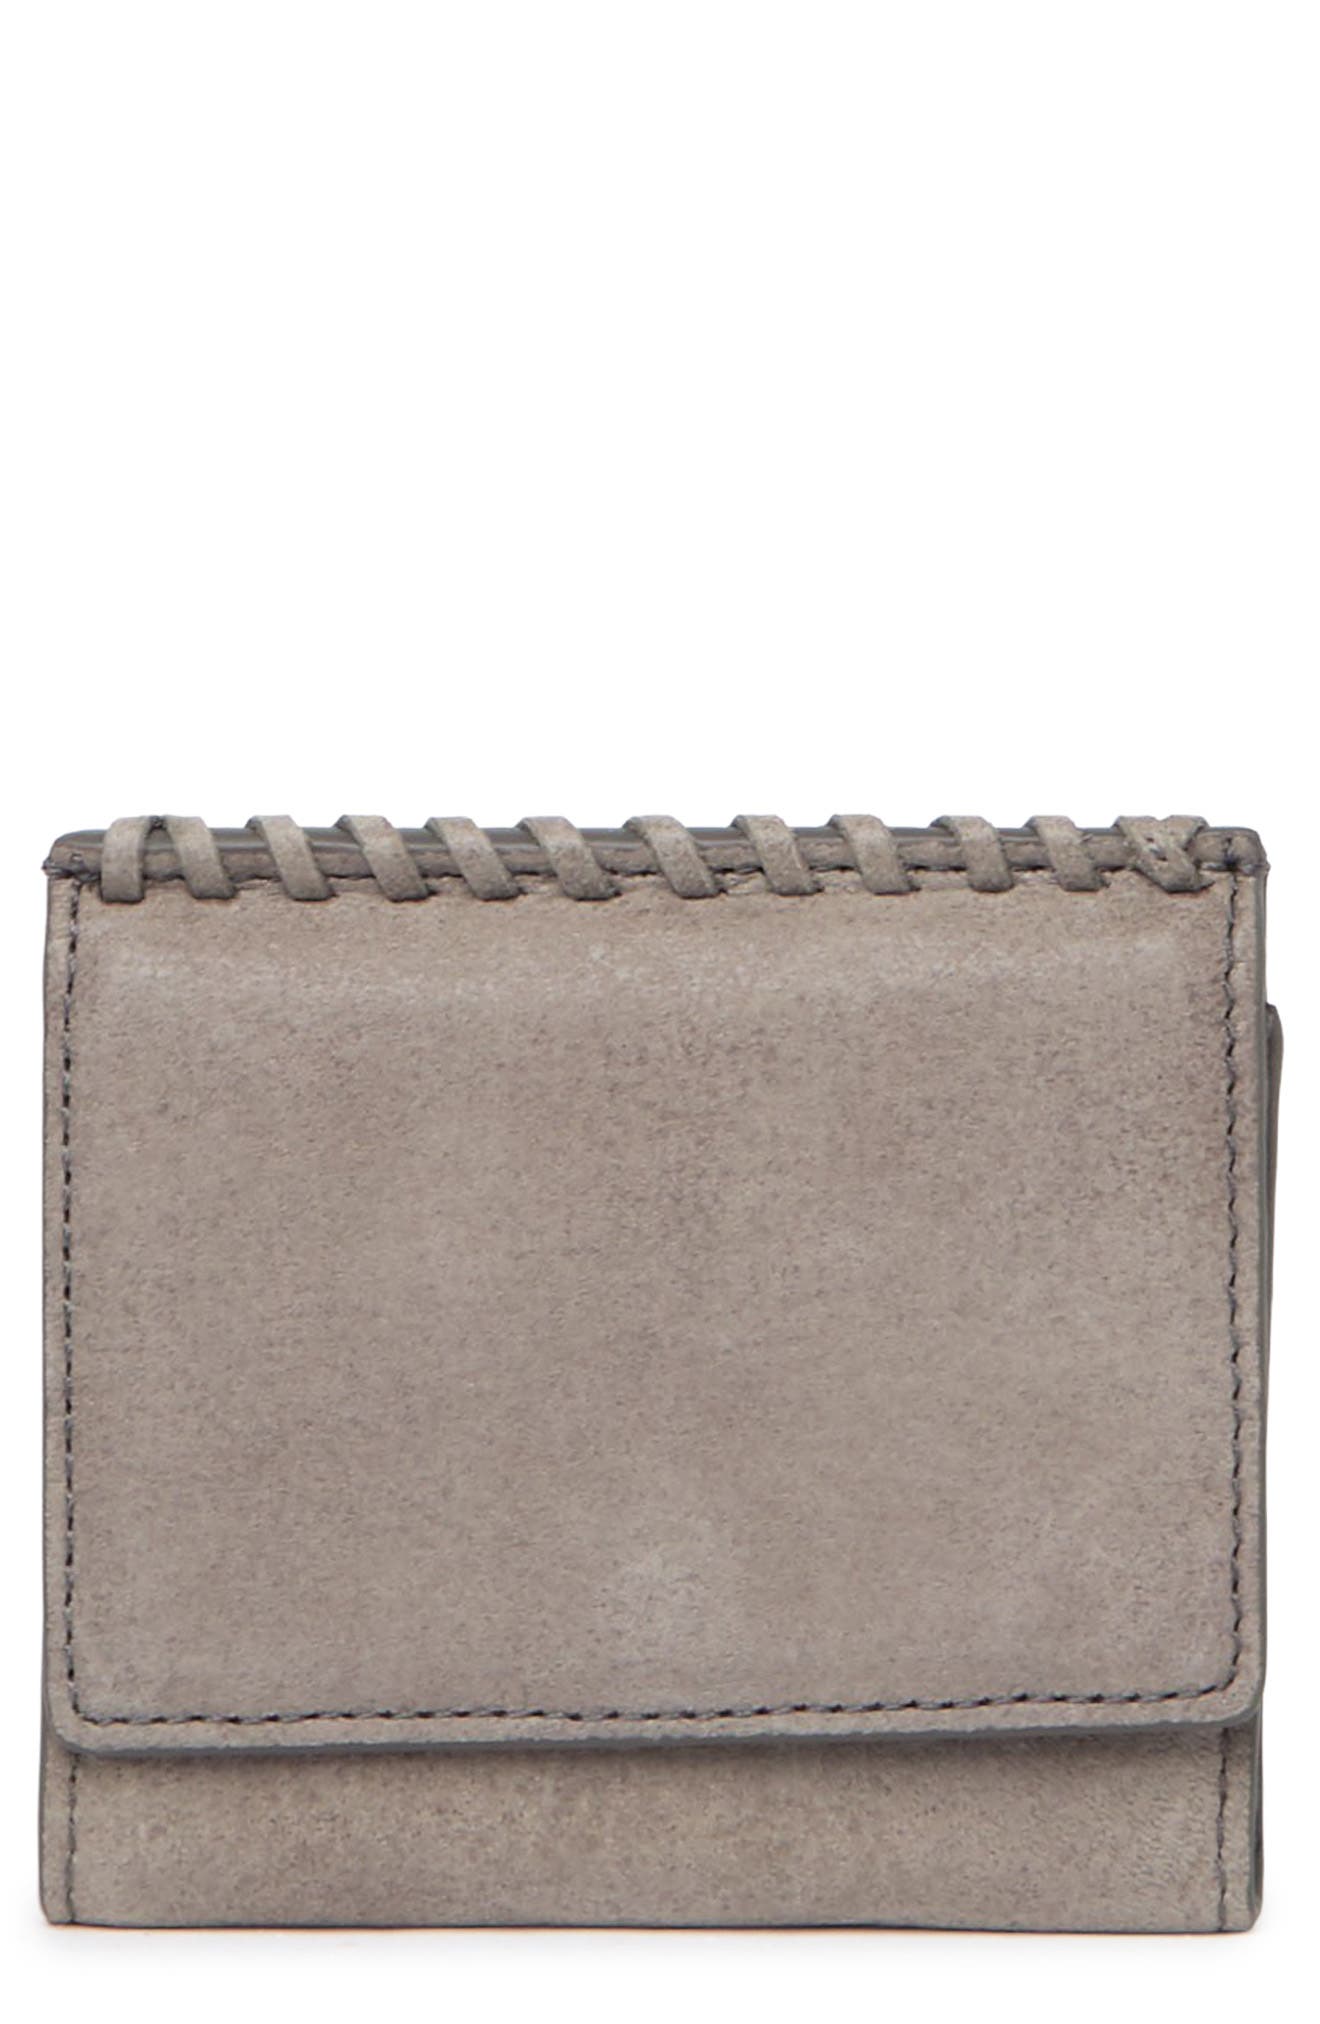 Hobo Stitch Woven Leather Bifold Wallet In Titanium